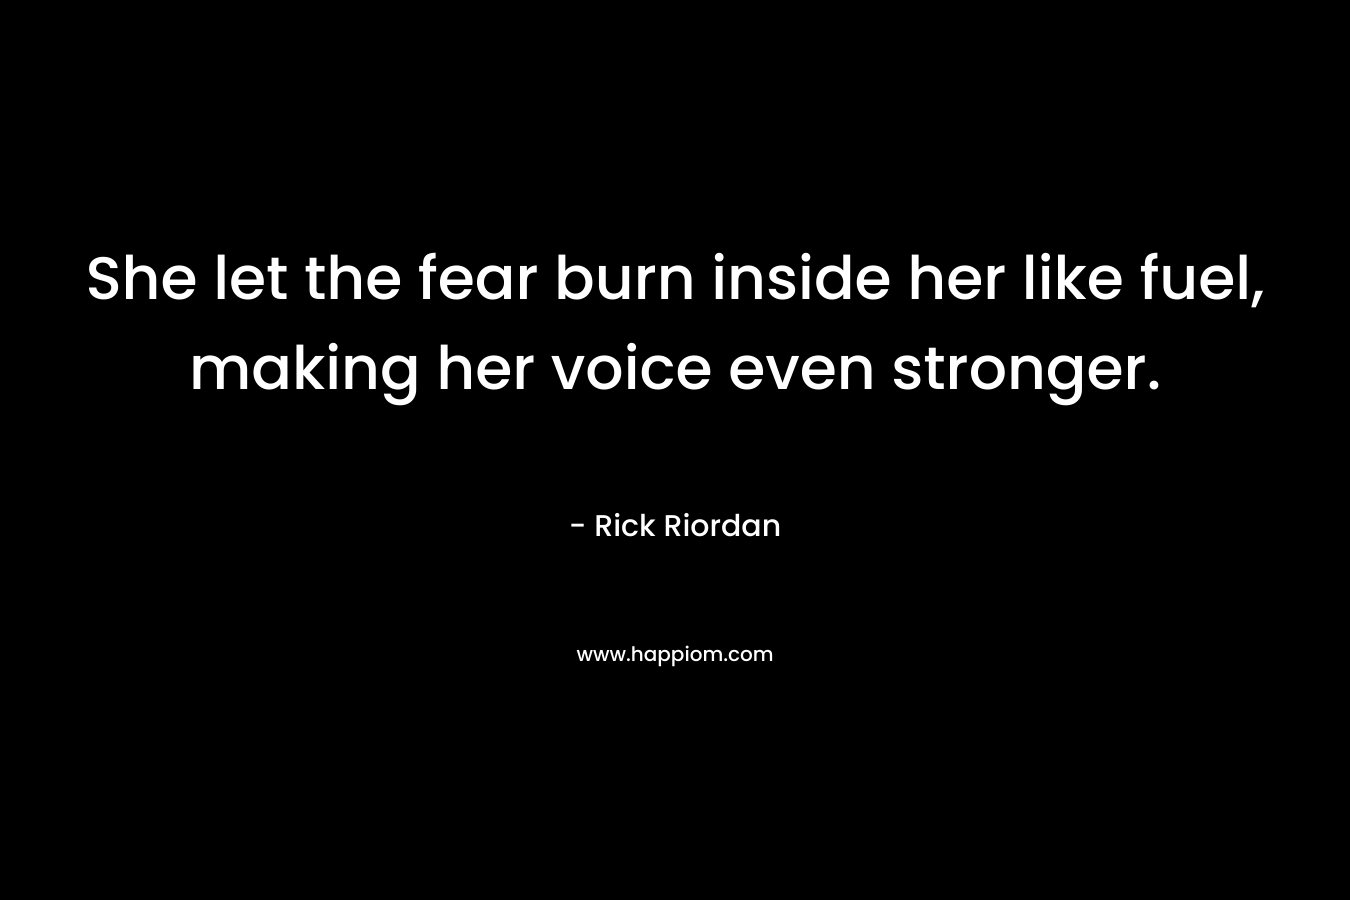 She let the fear burn inside her like fuel, making her voice even stronger.